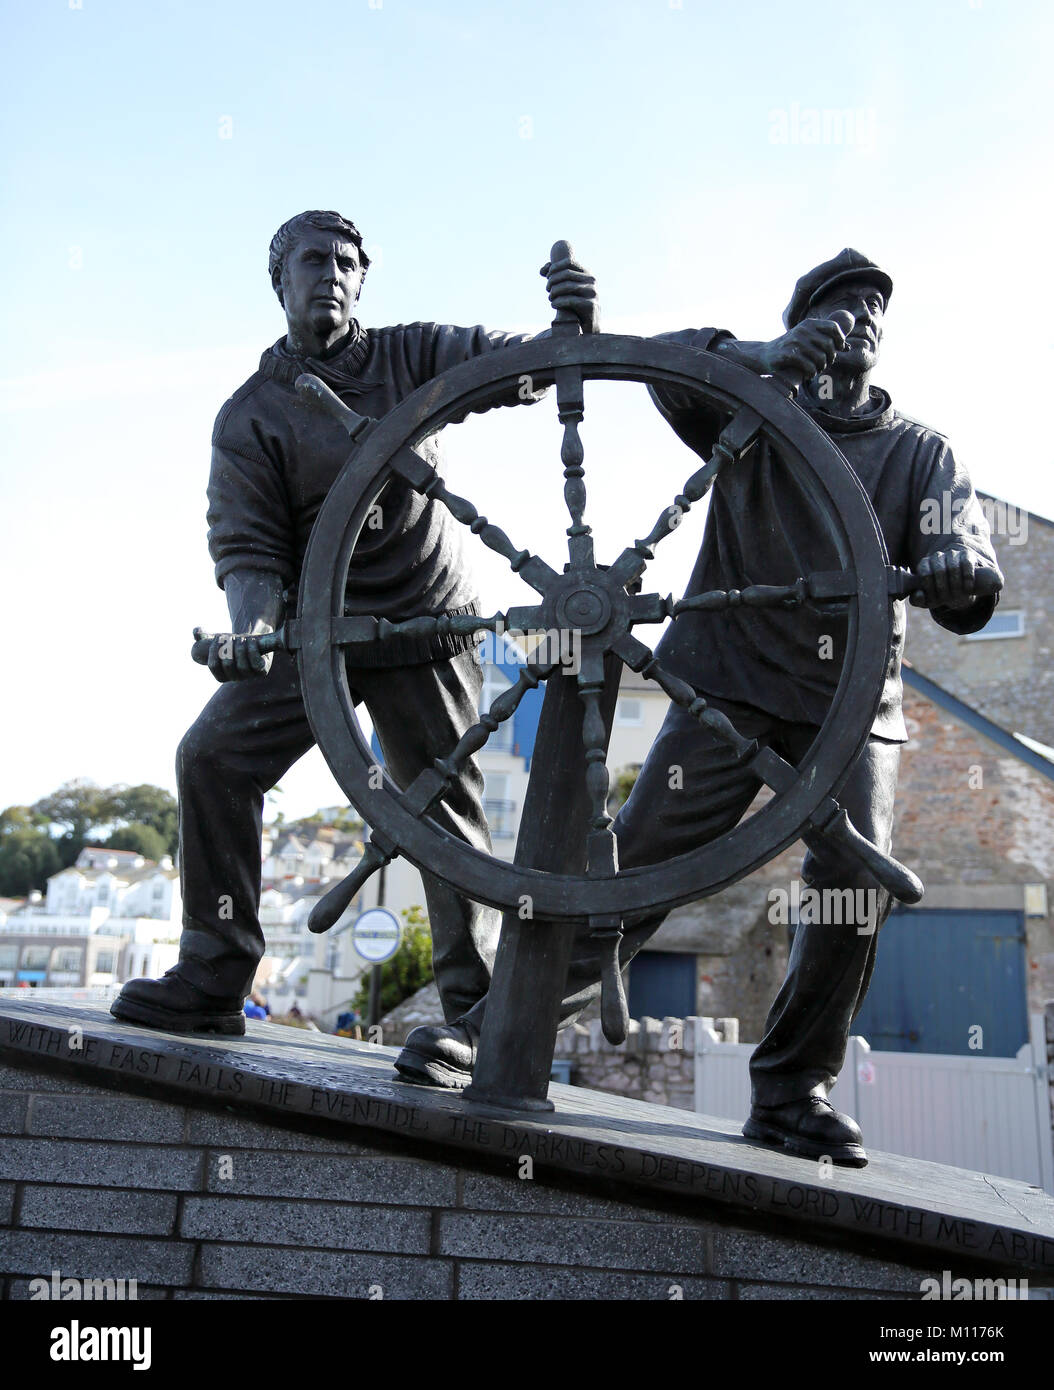 'Man and Boy', a statue by Elizabeh Hadley in Brixham, Devon UK. It was unveiled on 26.11.16. It is based on 'The Wheel', an etching by Arthur Brisco. Stock Photo